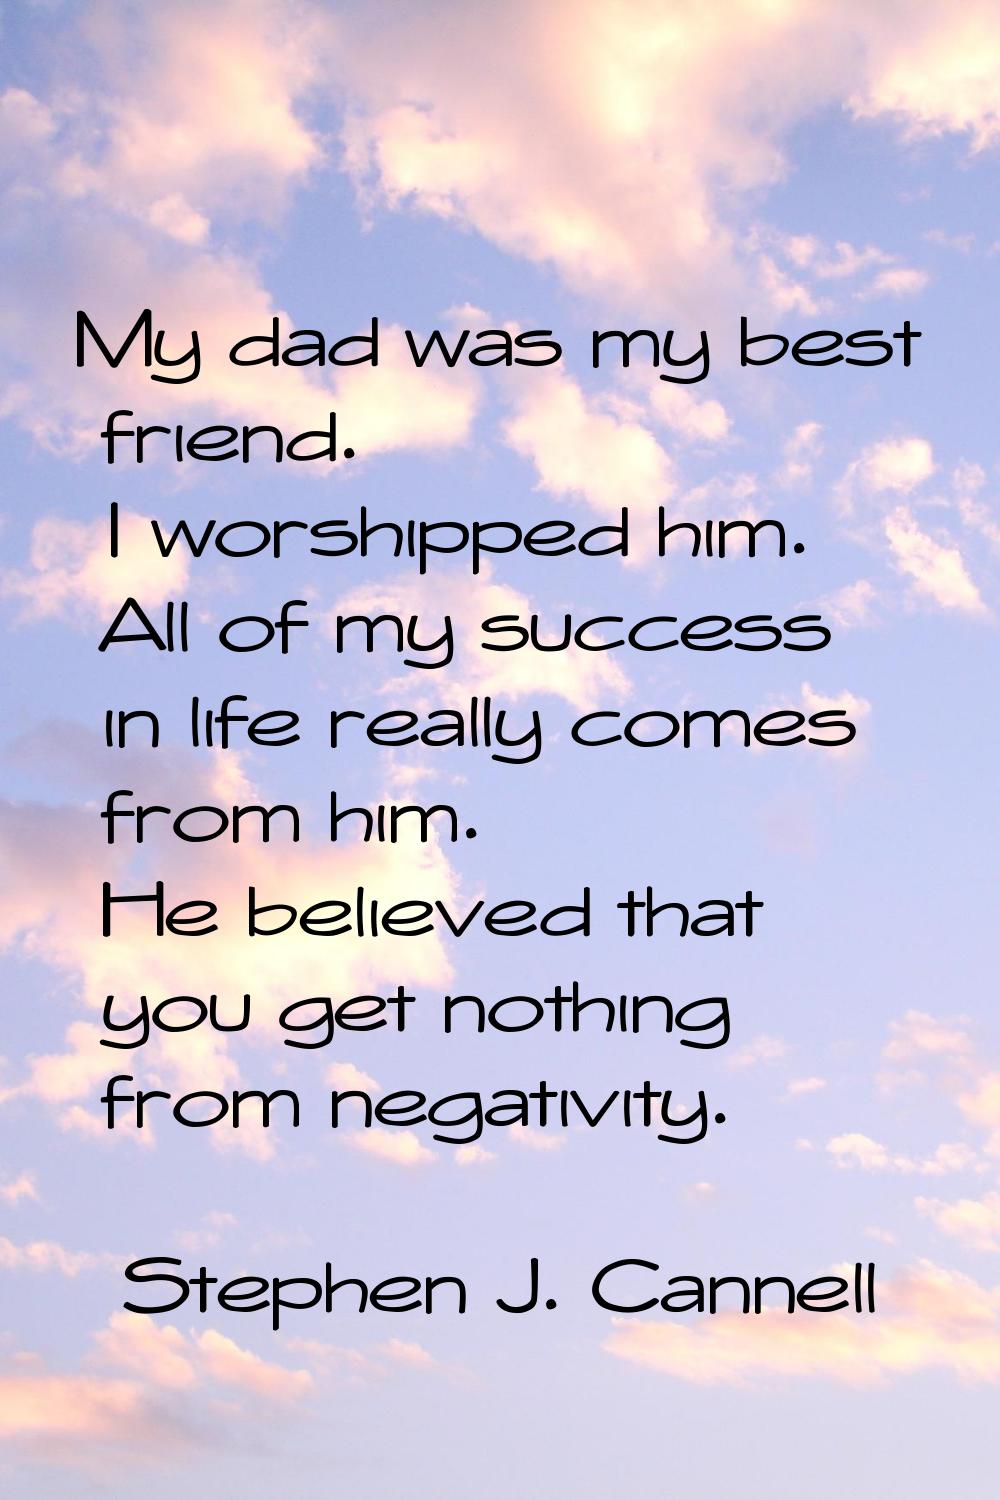 My dad was my best friend. I worshipped him. All of my success in life really comes from him. He be